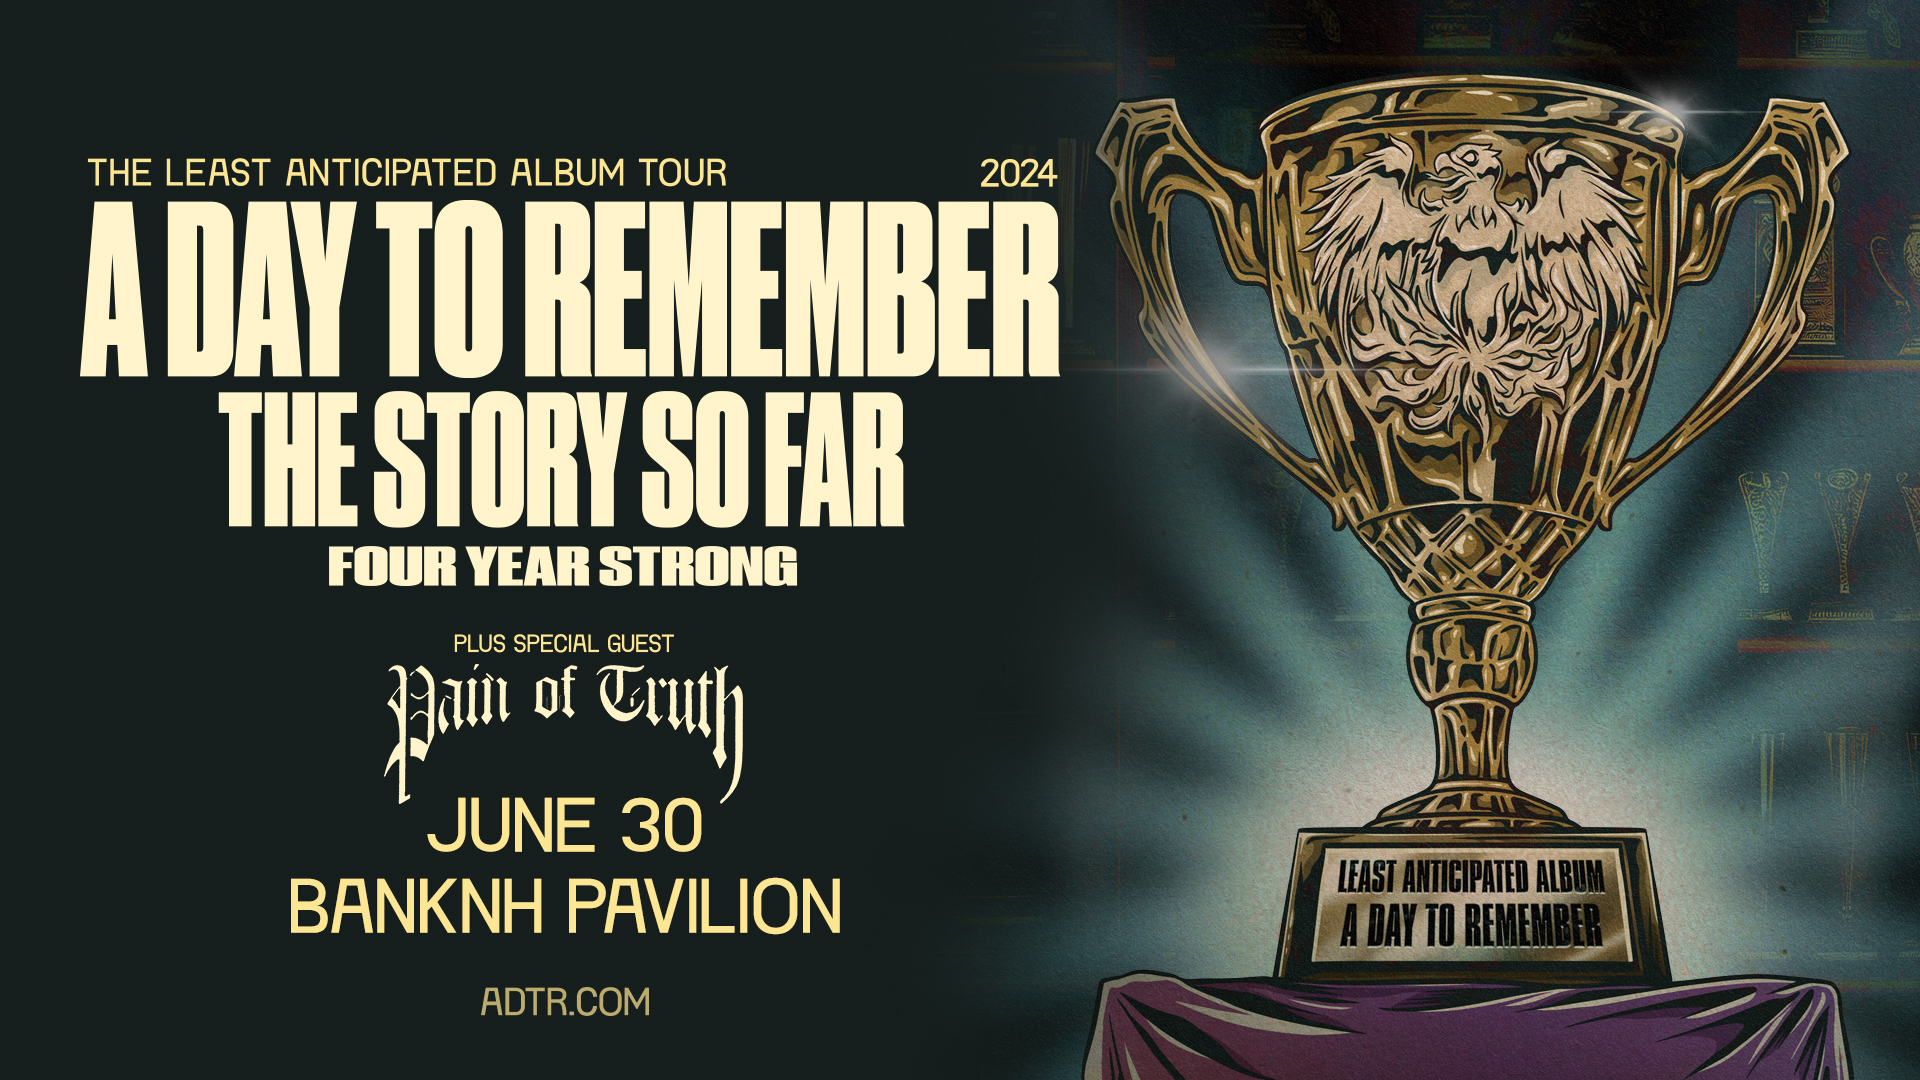 Win Tickets To A Day To Remember At BankNH Pavilion!